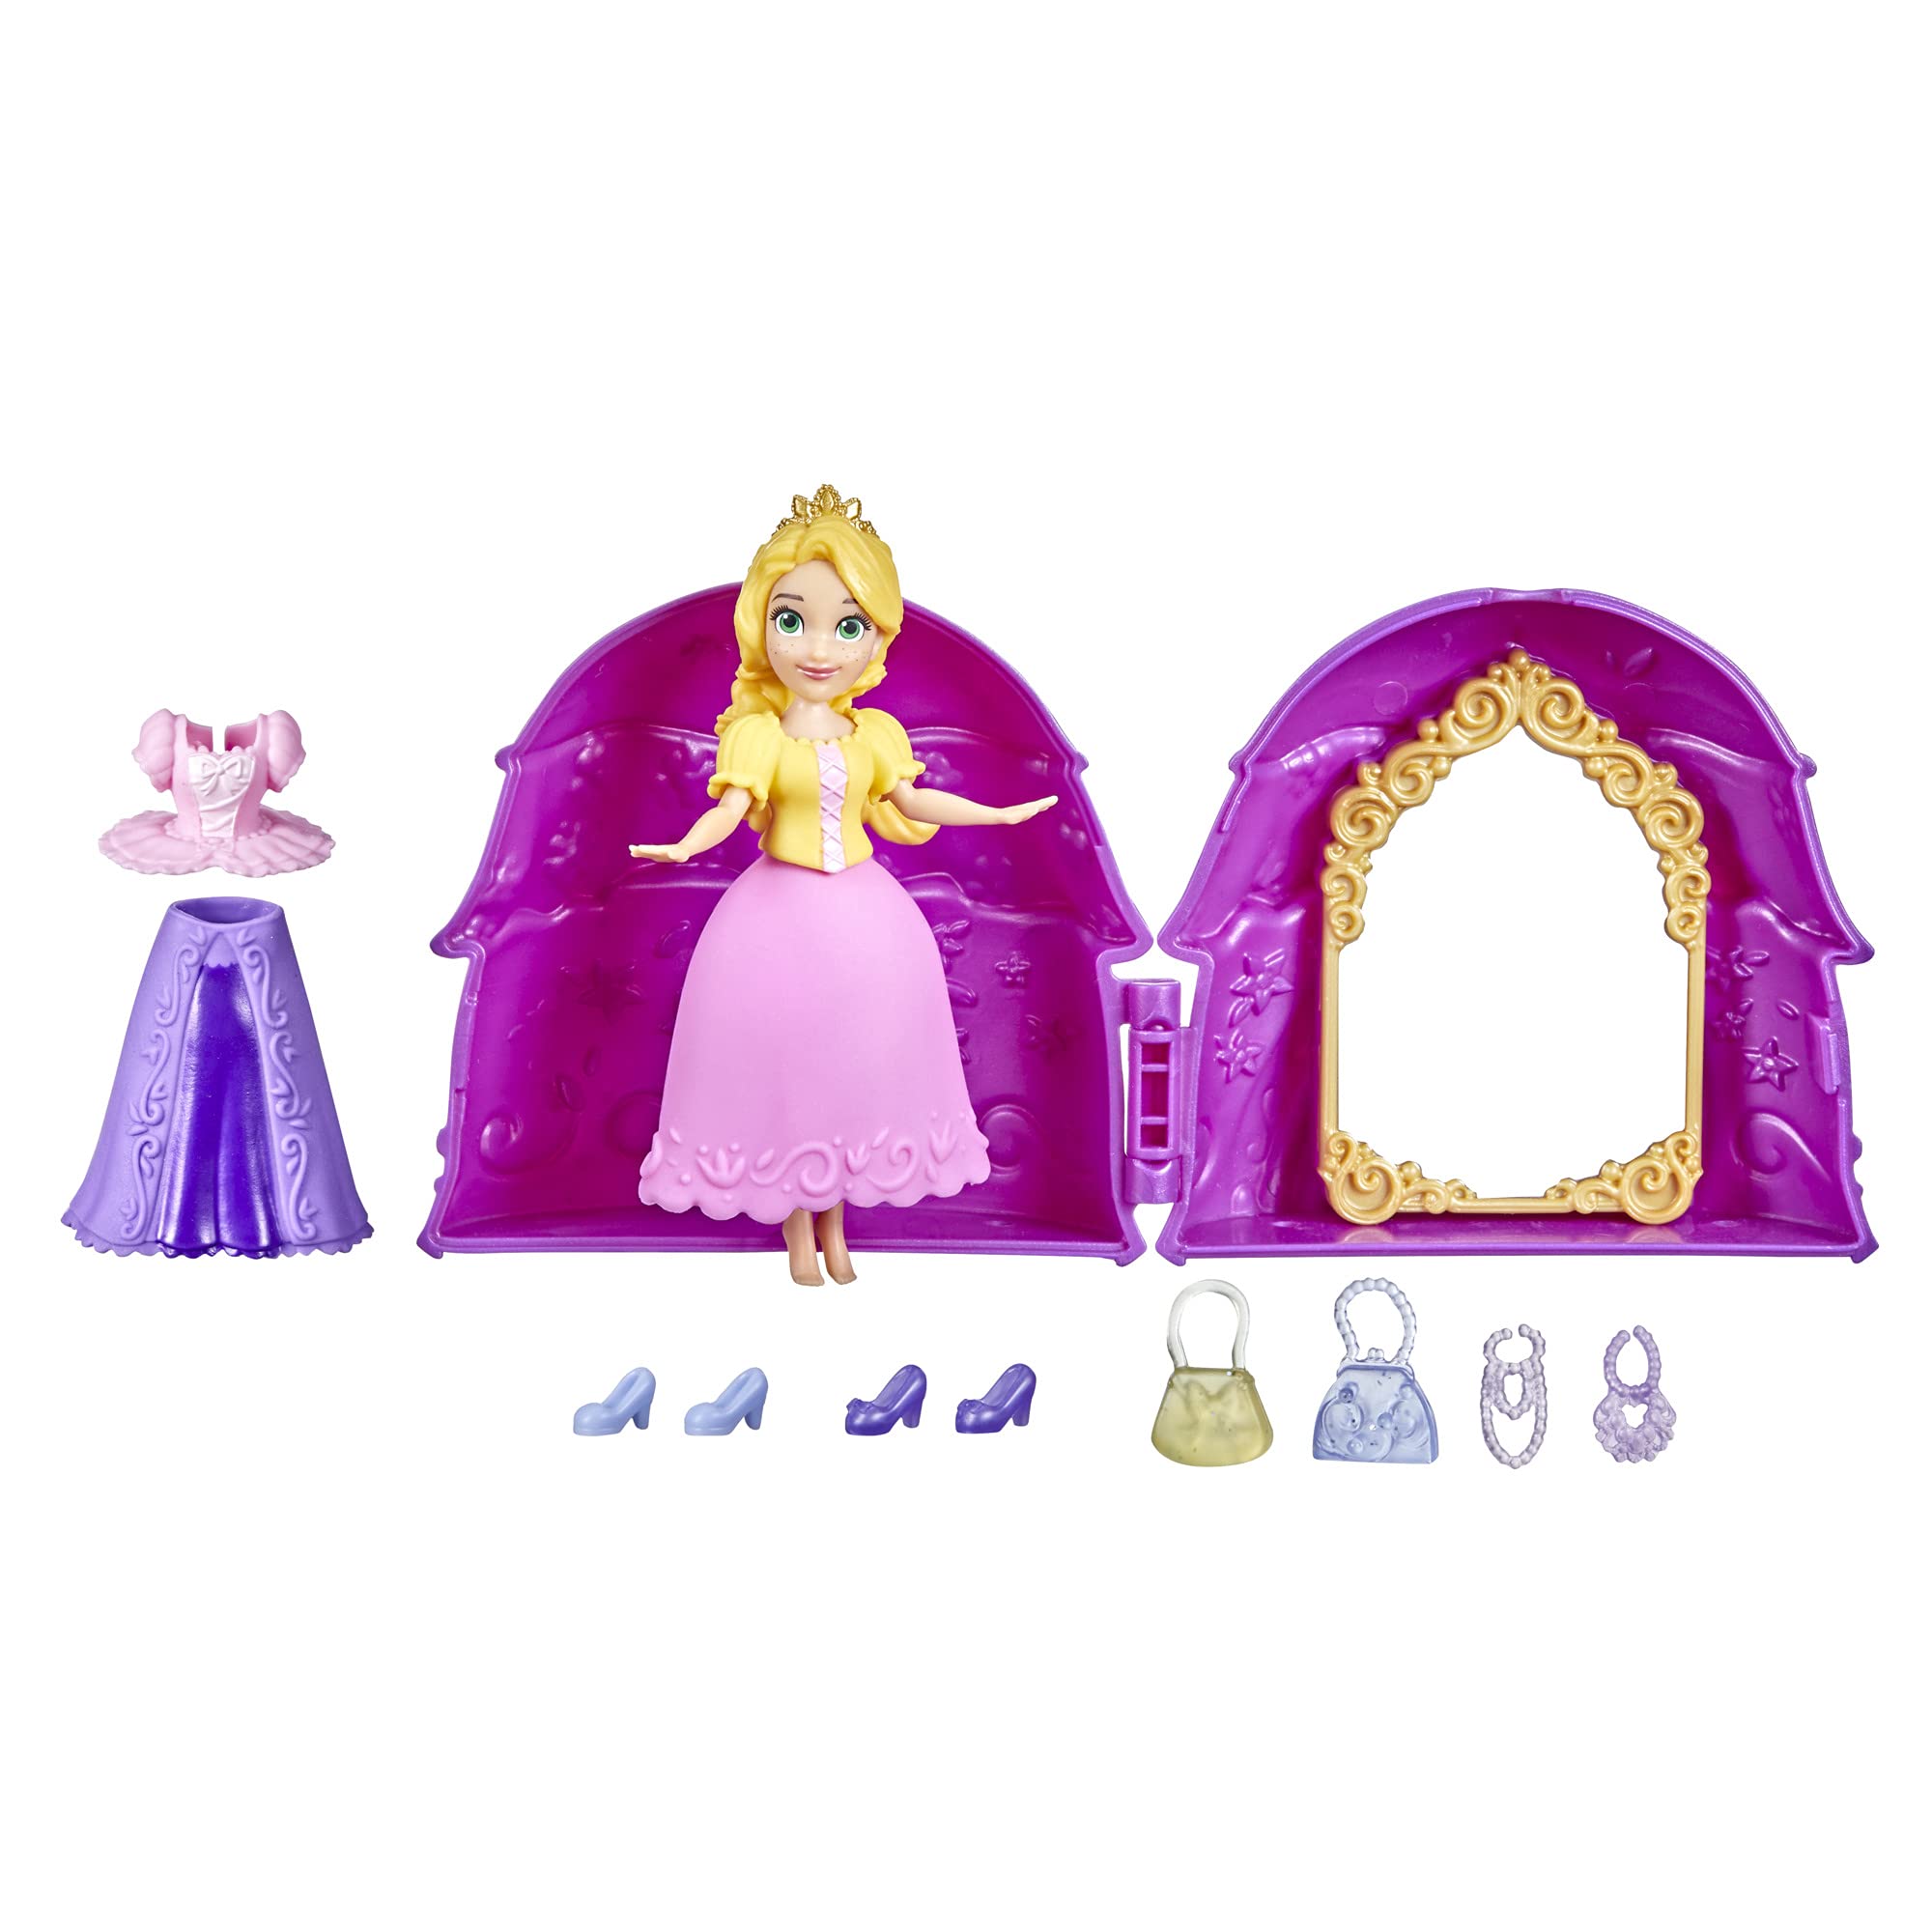 Disney Princess Secret Styles Fashion Surprise Rapunzel, Mini Doll Playset with Extra Clothes and Accessories, Toy for Girls 4 and Up